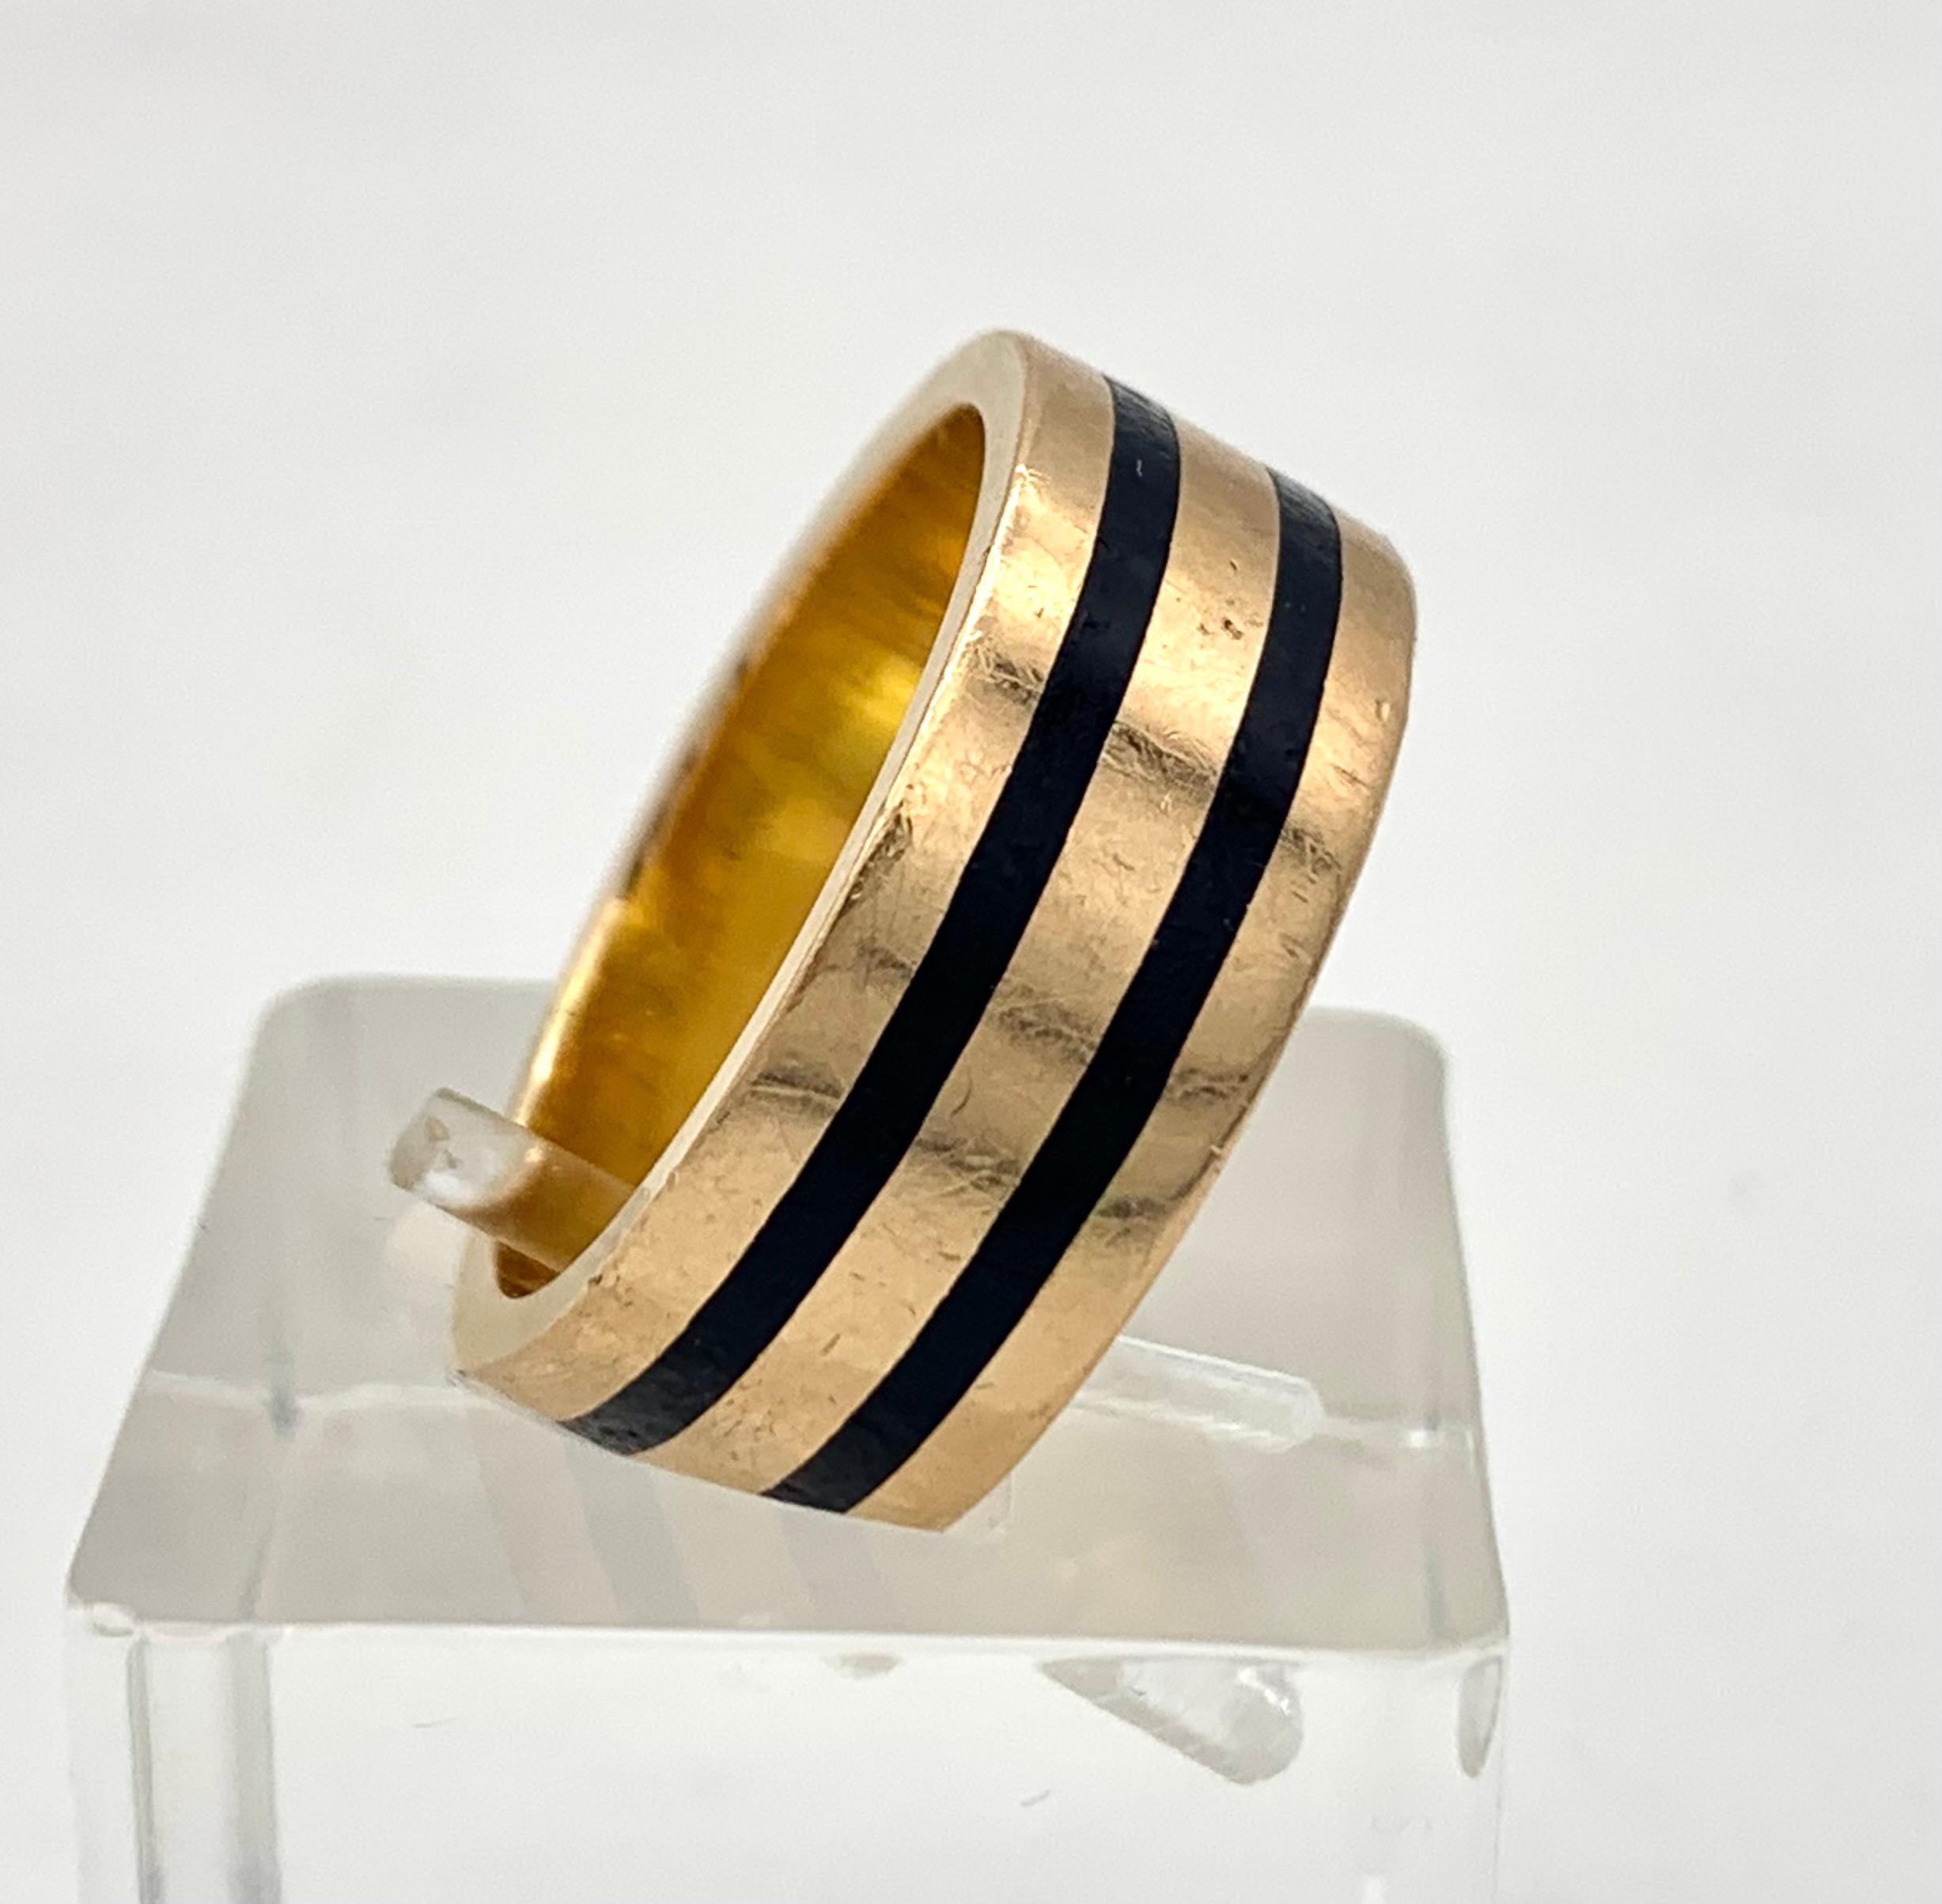 This elegant and solid gold and enamel band ring has been handcrafted around 1880 out of 15 carat gold. It is of modernistic elegance with its two narrow enamelled lines. The ring bears an inscription on the inside:
